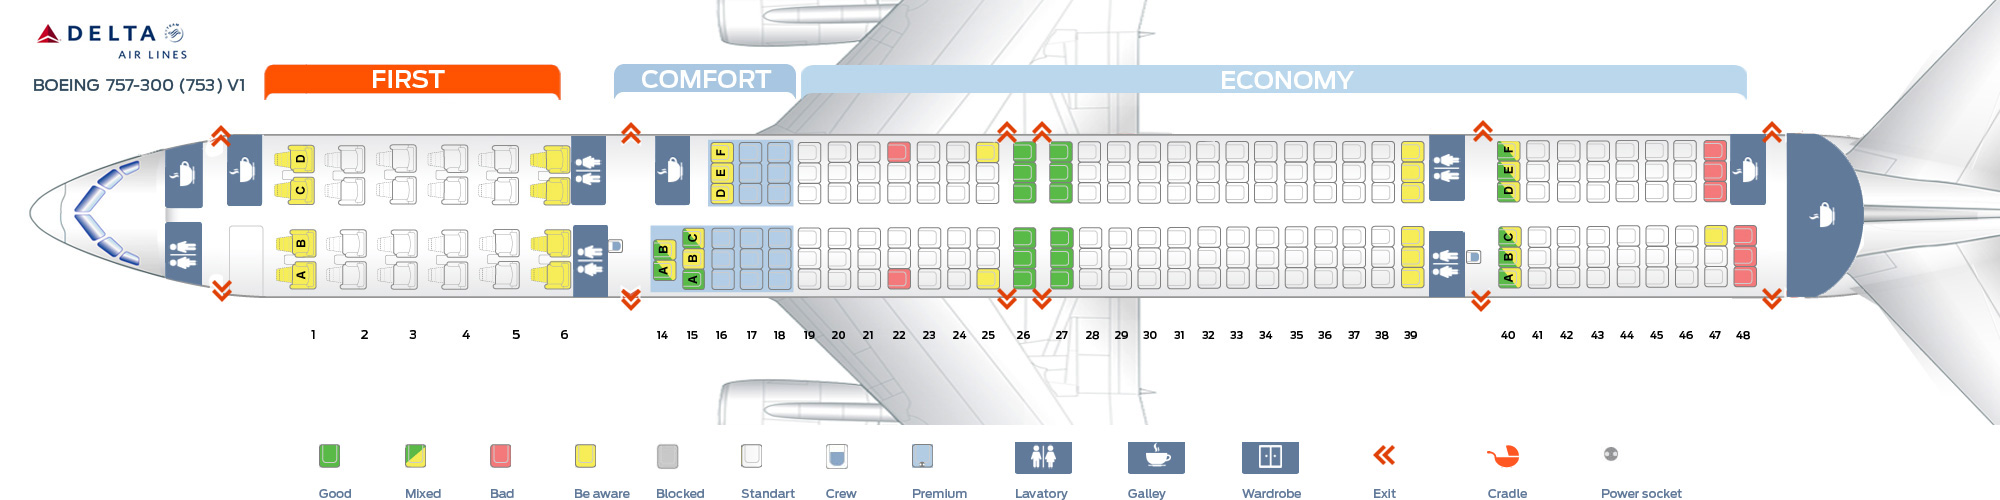 Delta Boeing 757 300 Seating Chart